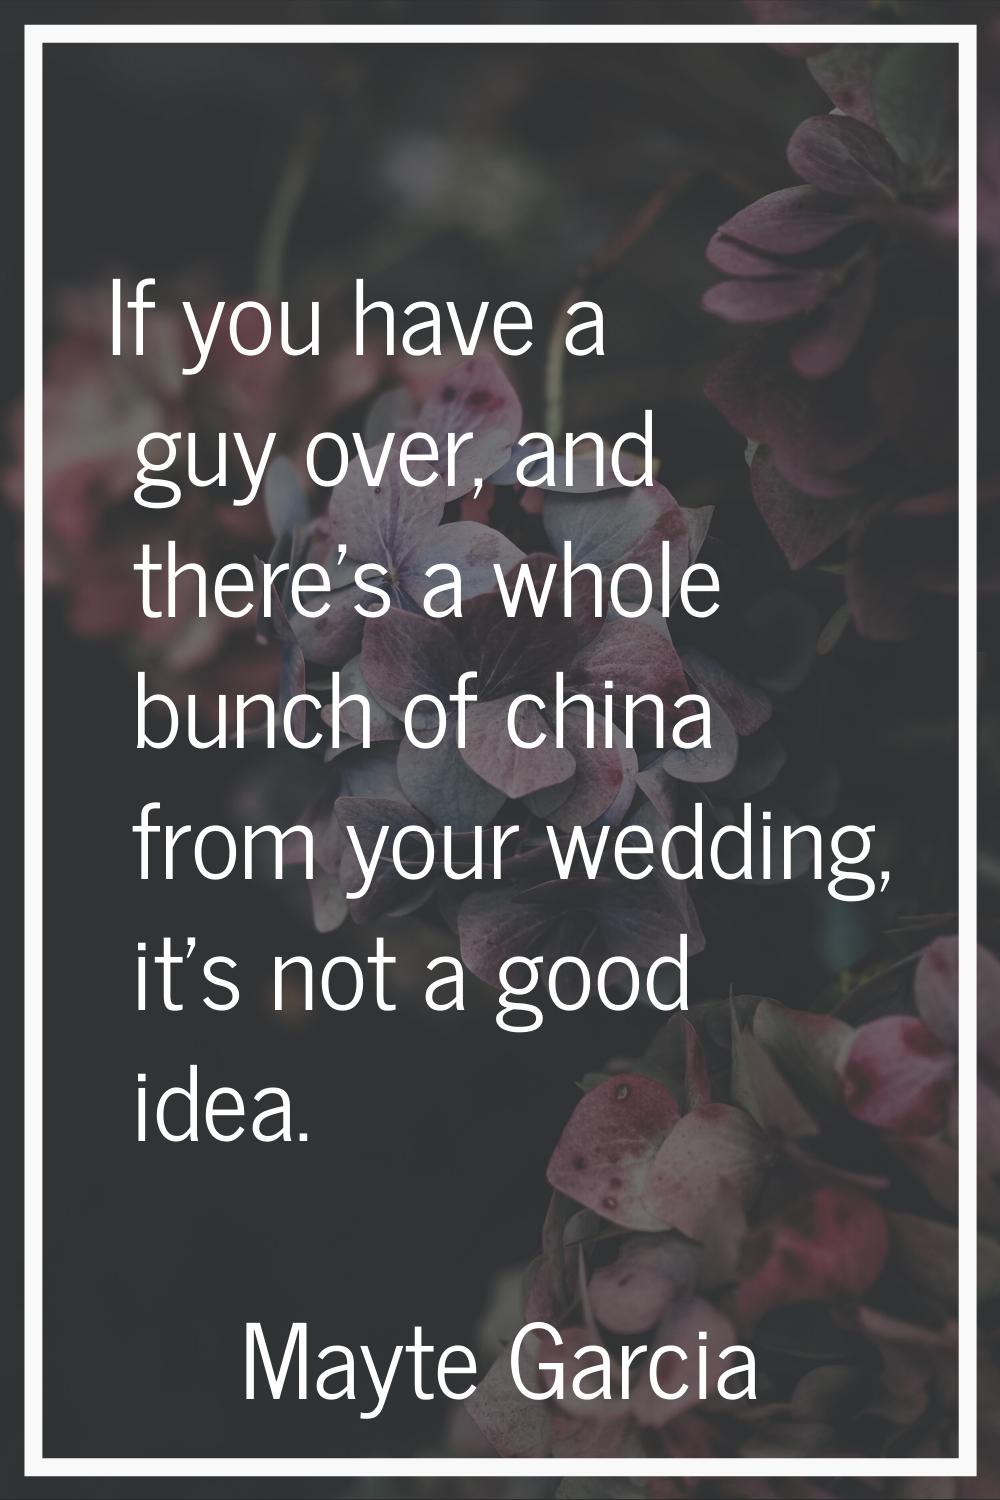 If you have a guy over, and there's a whole bunch of china from your wedding, it's not a good idea.